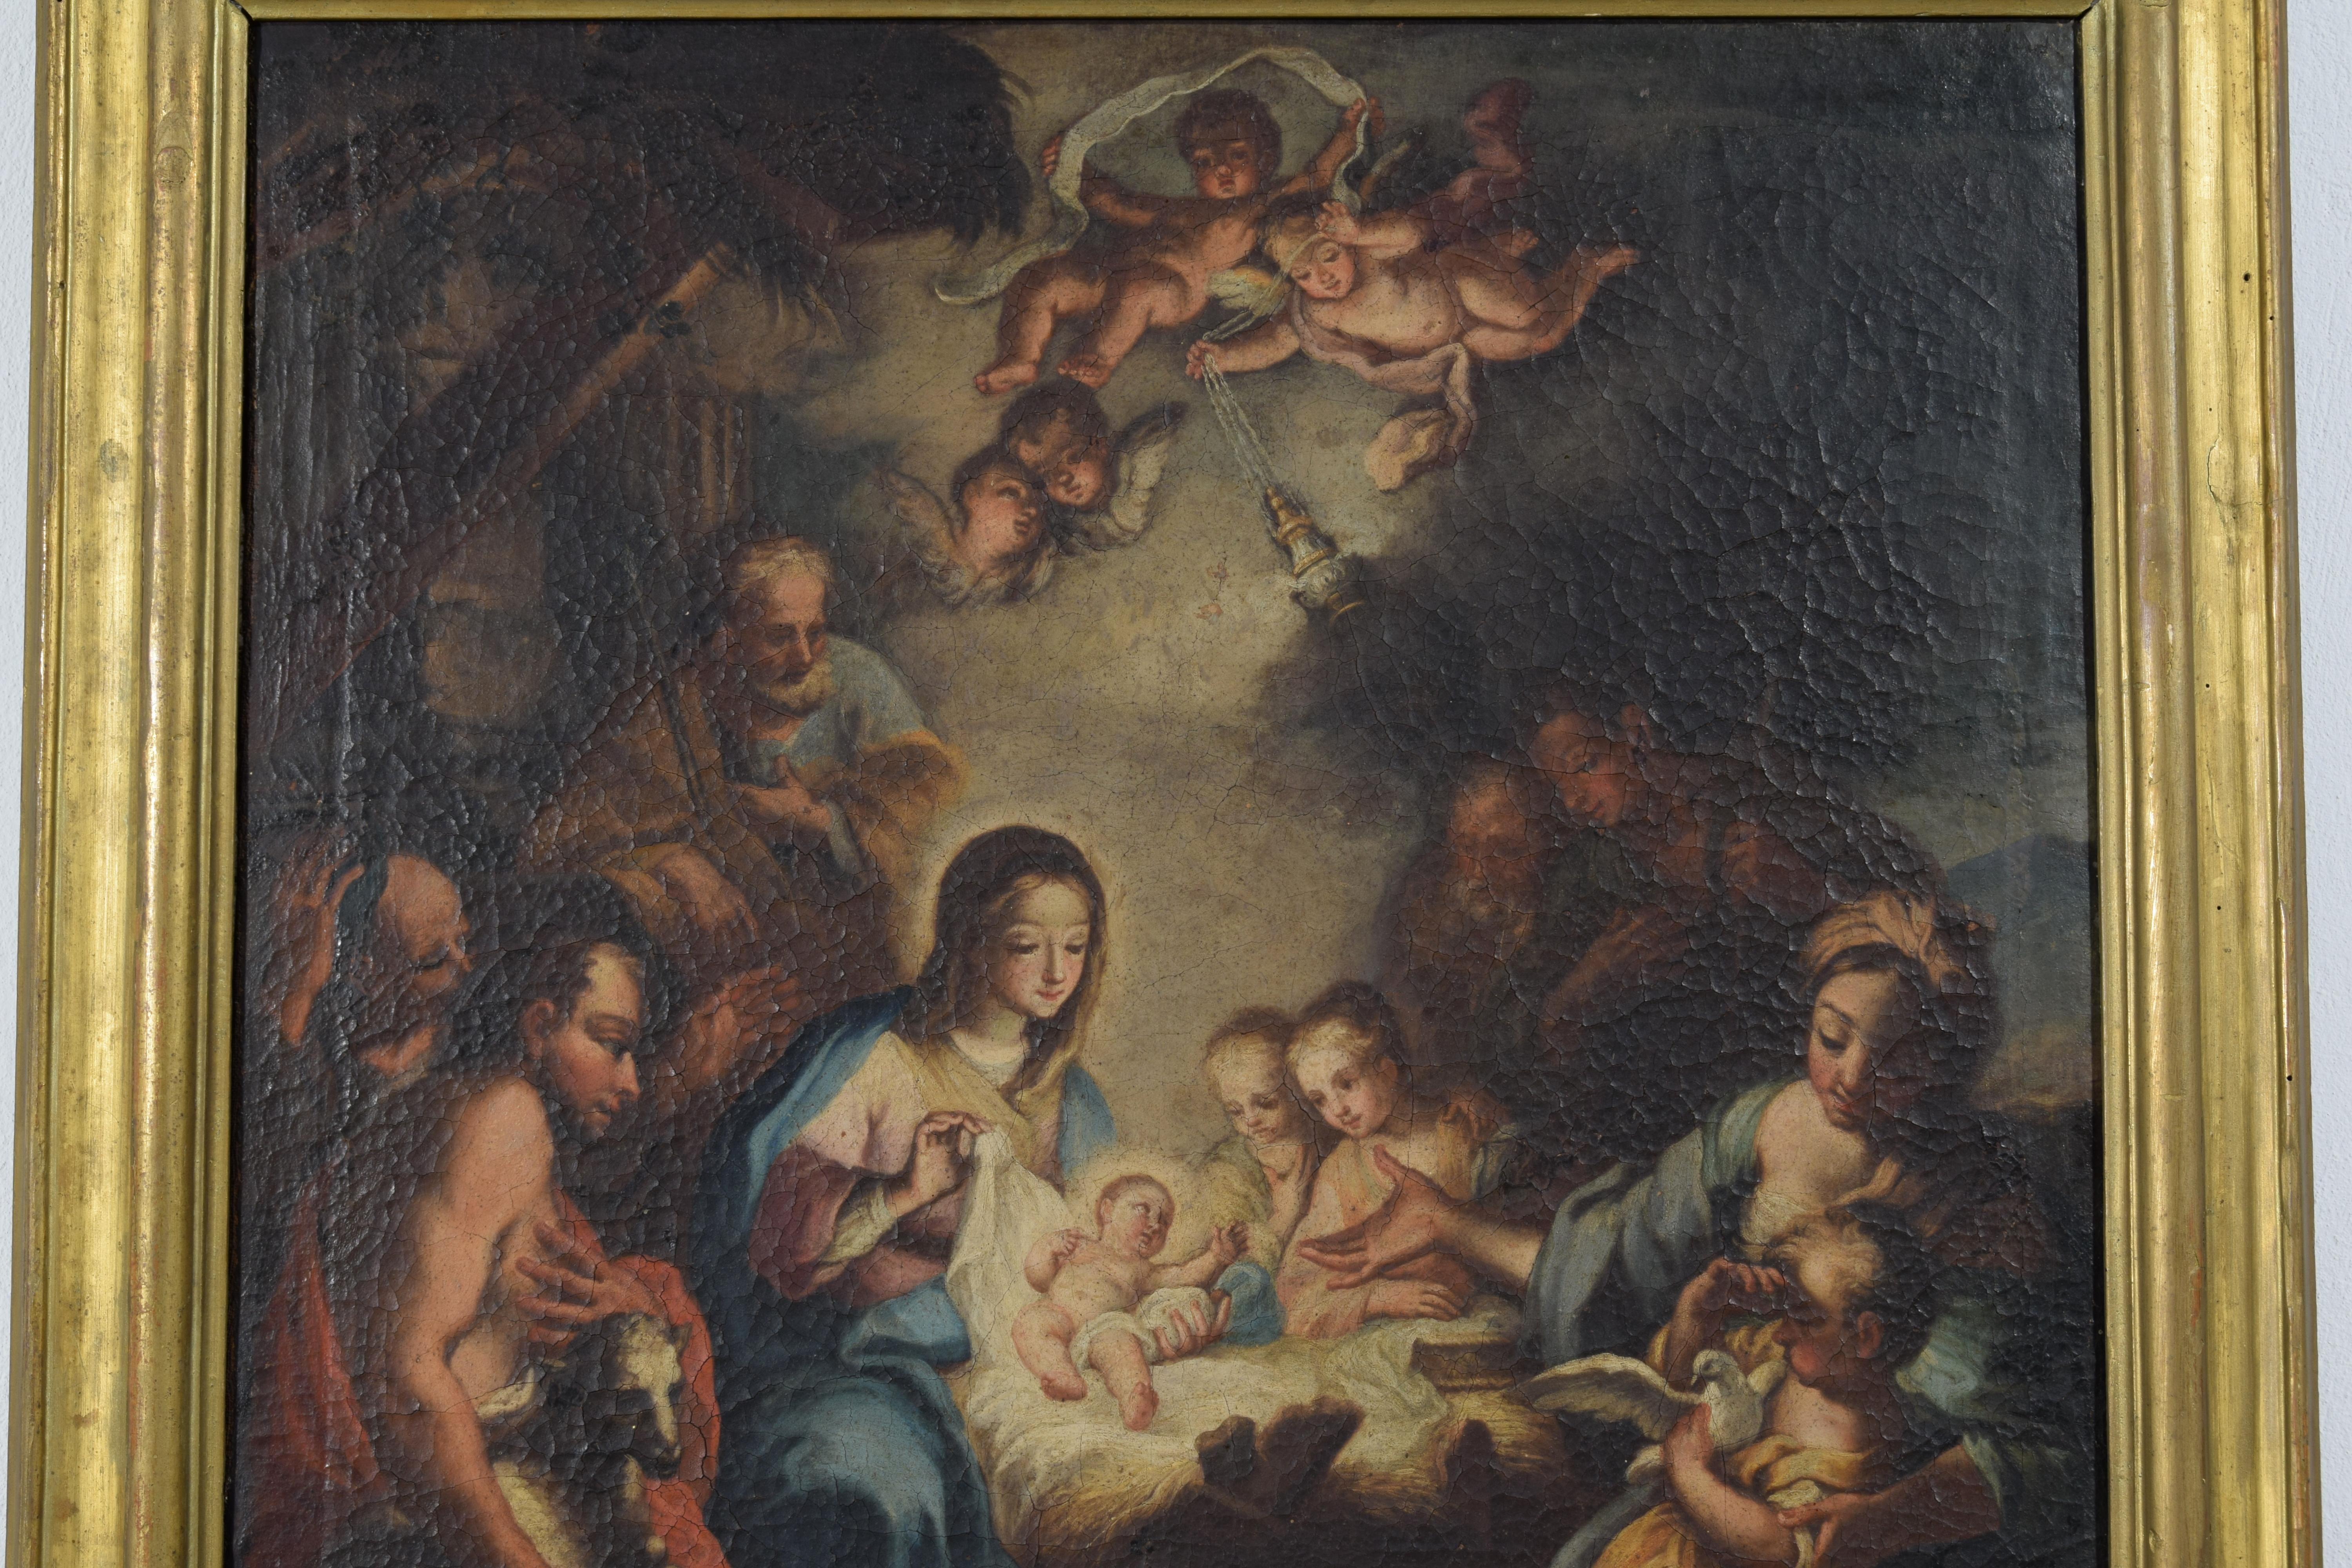 Hand-Painted 18th Century, Italian Painting, Adoration of the Shepherds by Follower of Conca